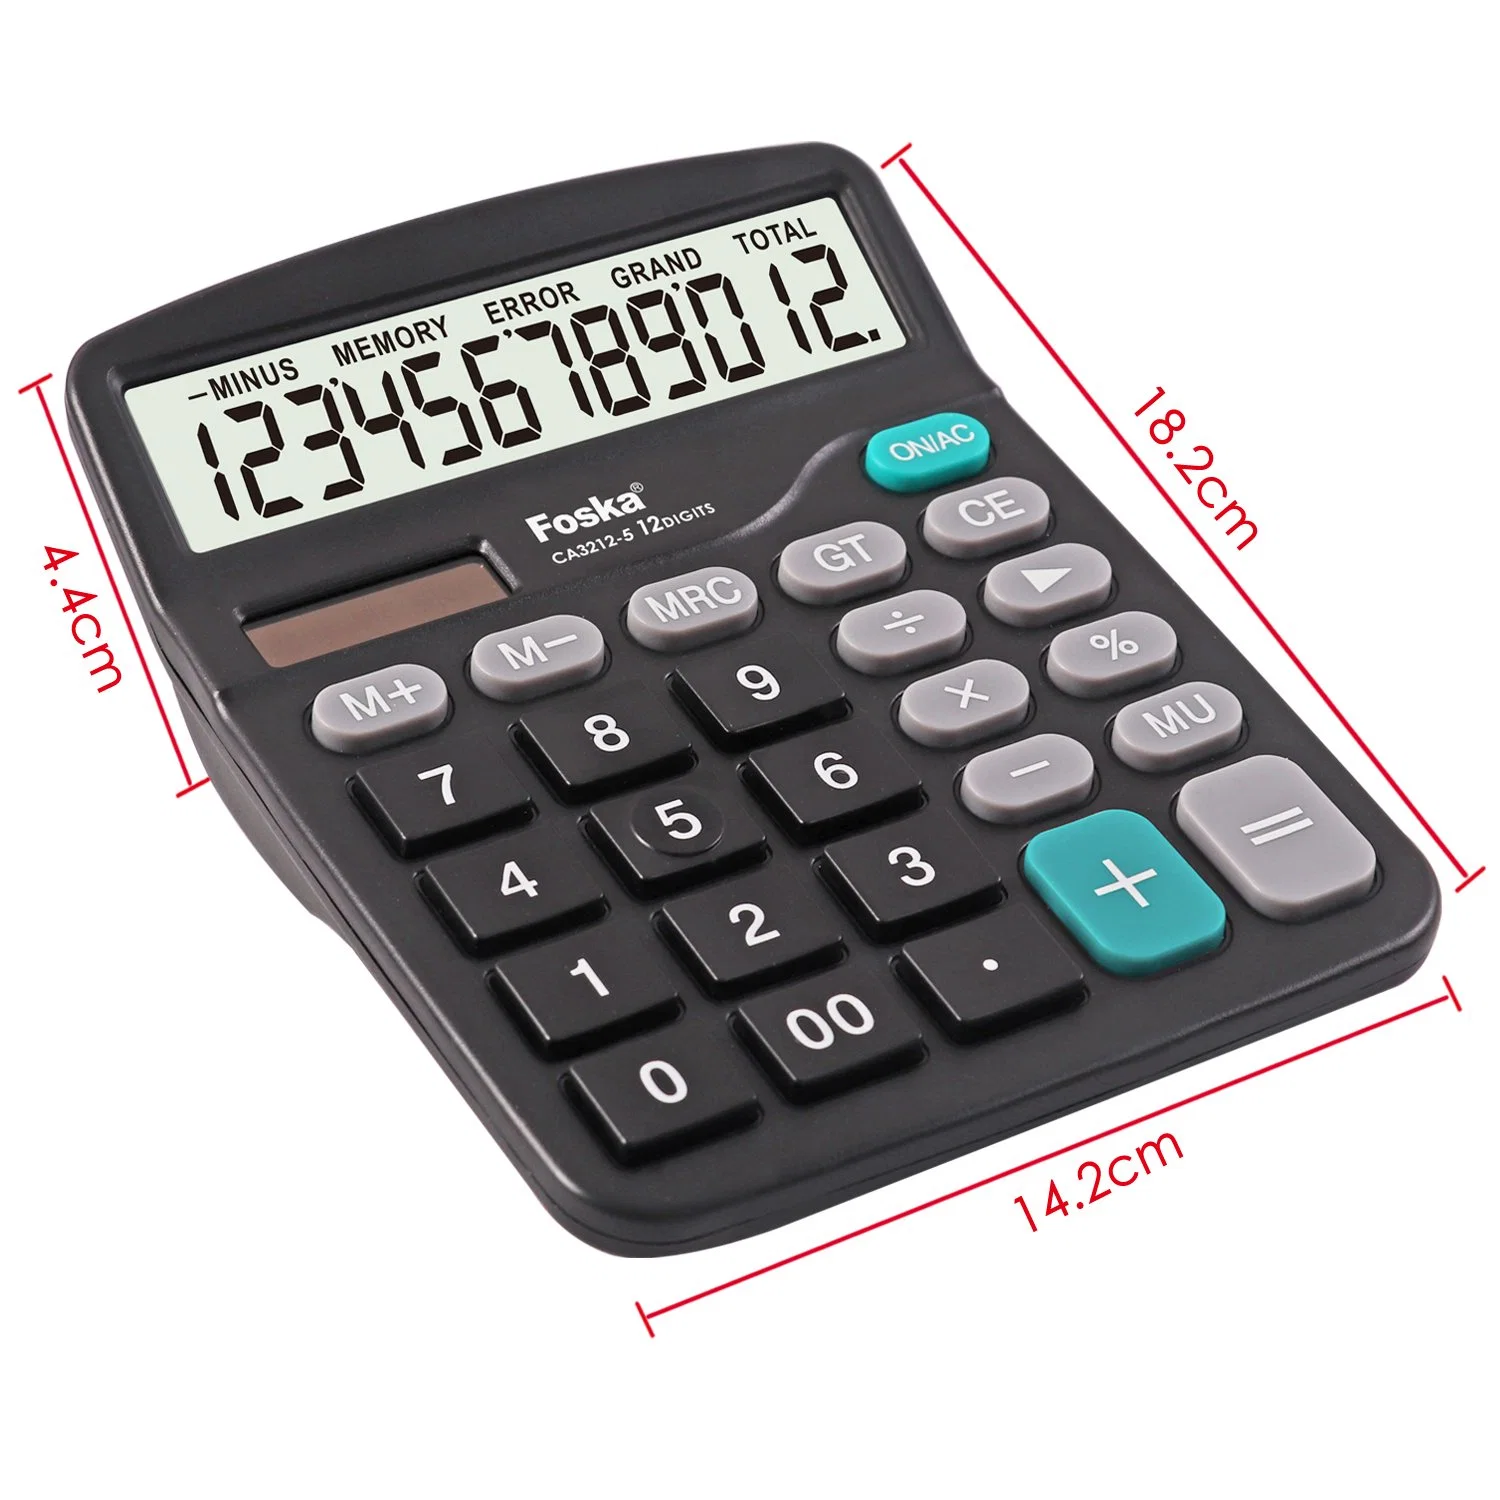 High quality/High cost performance 12 Digit Solar Power Office Calculator